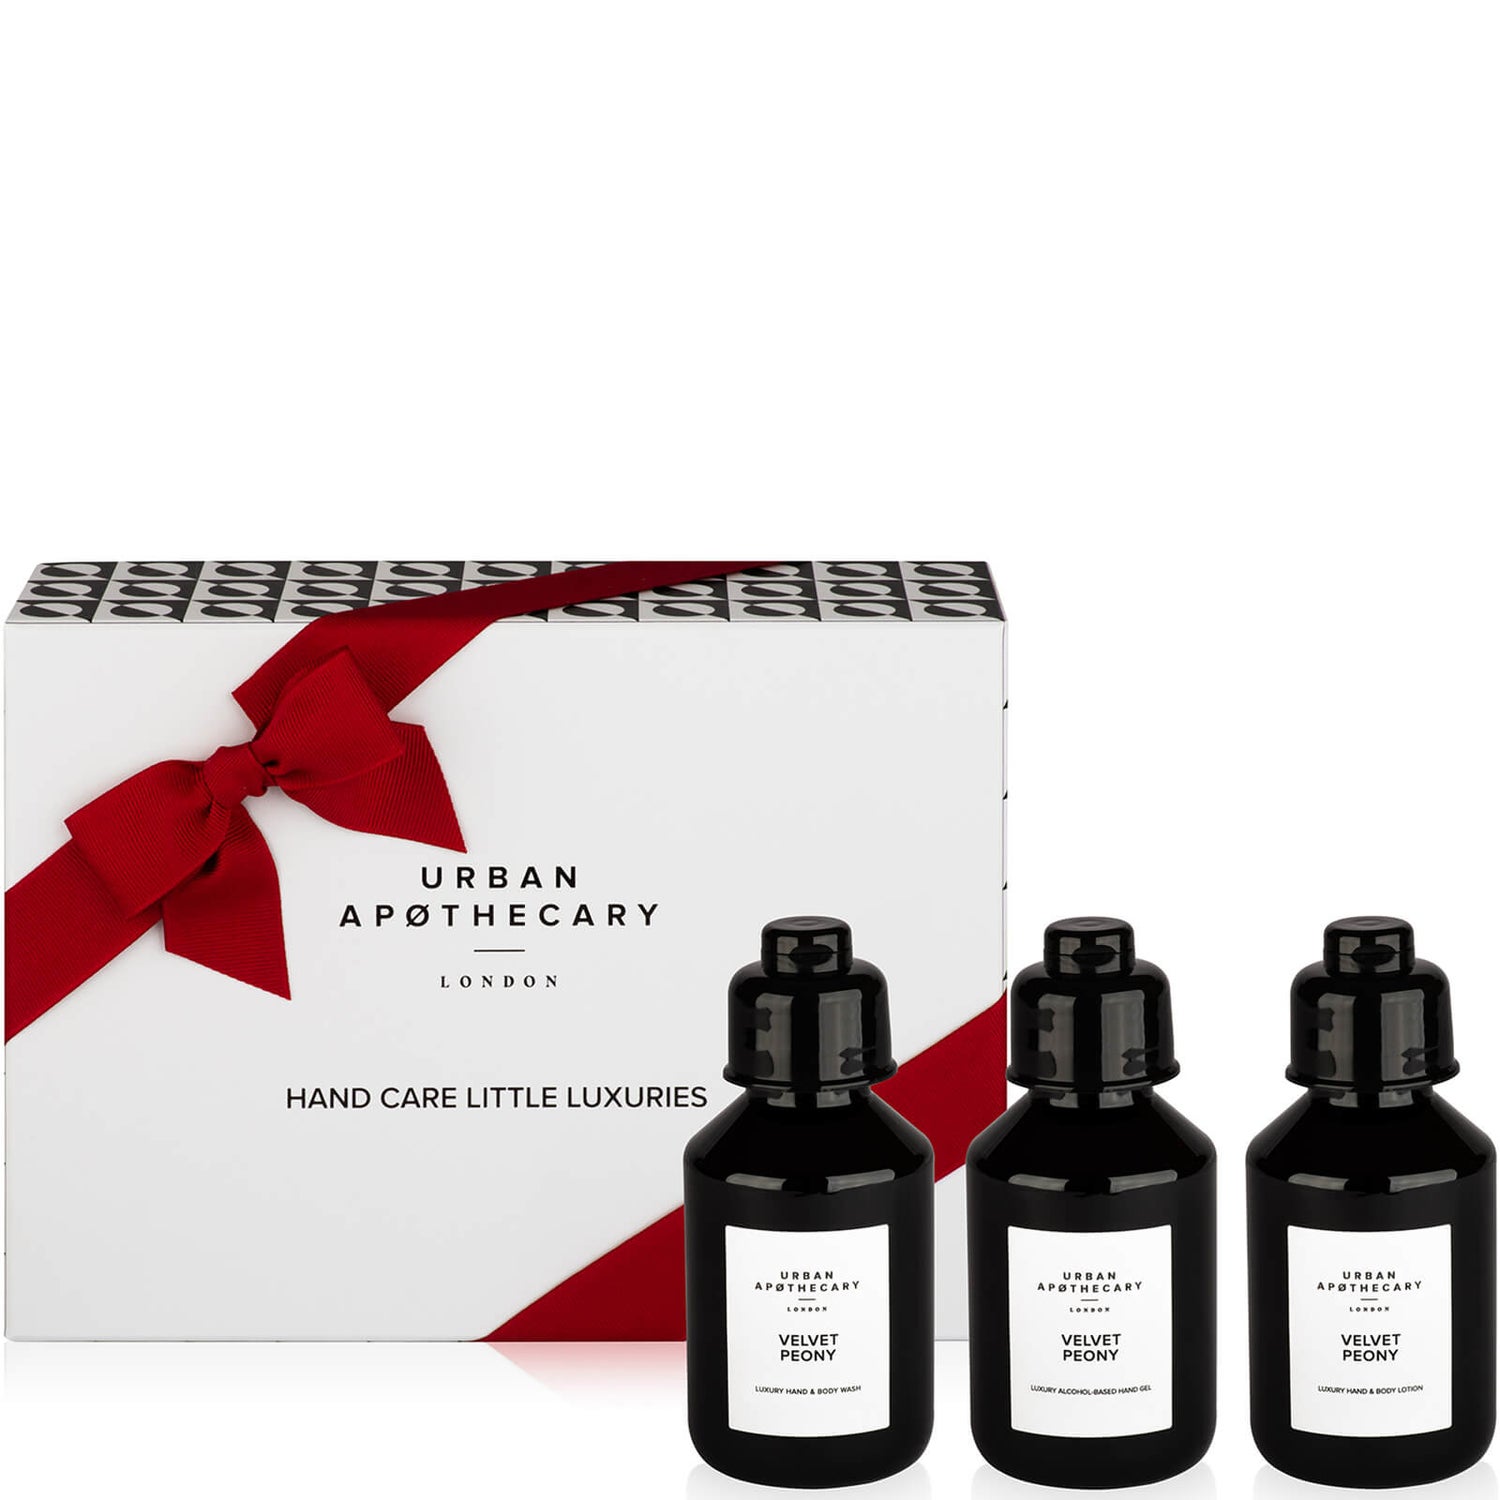 Urban Apothecary Velvet Peony Hand Care Little Luxuries Gift Set (3 pieces)